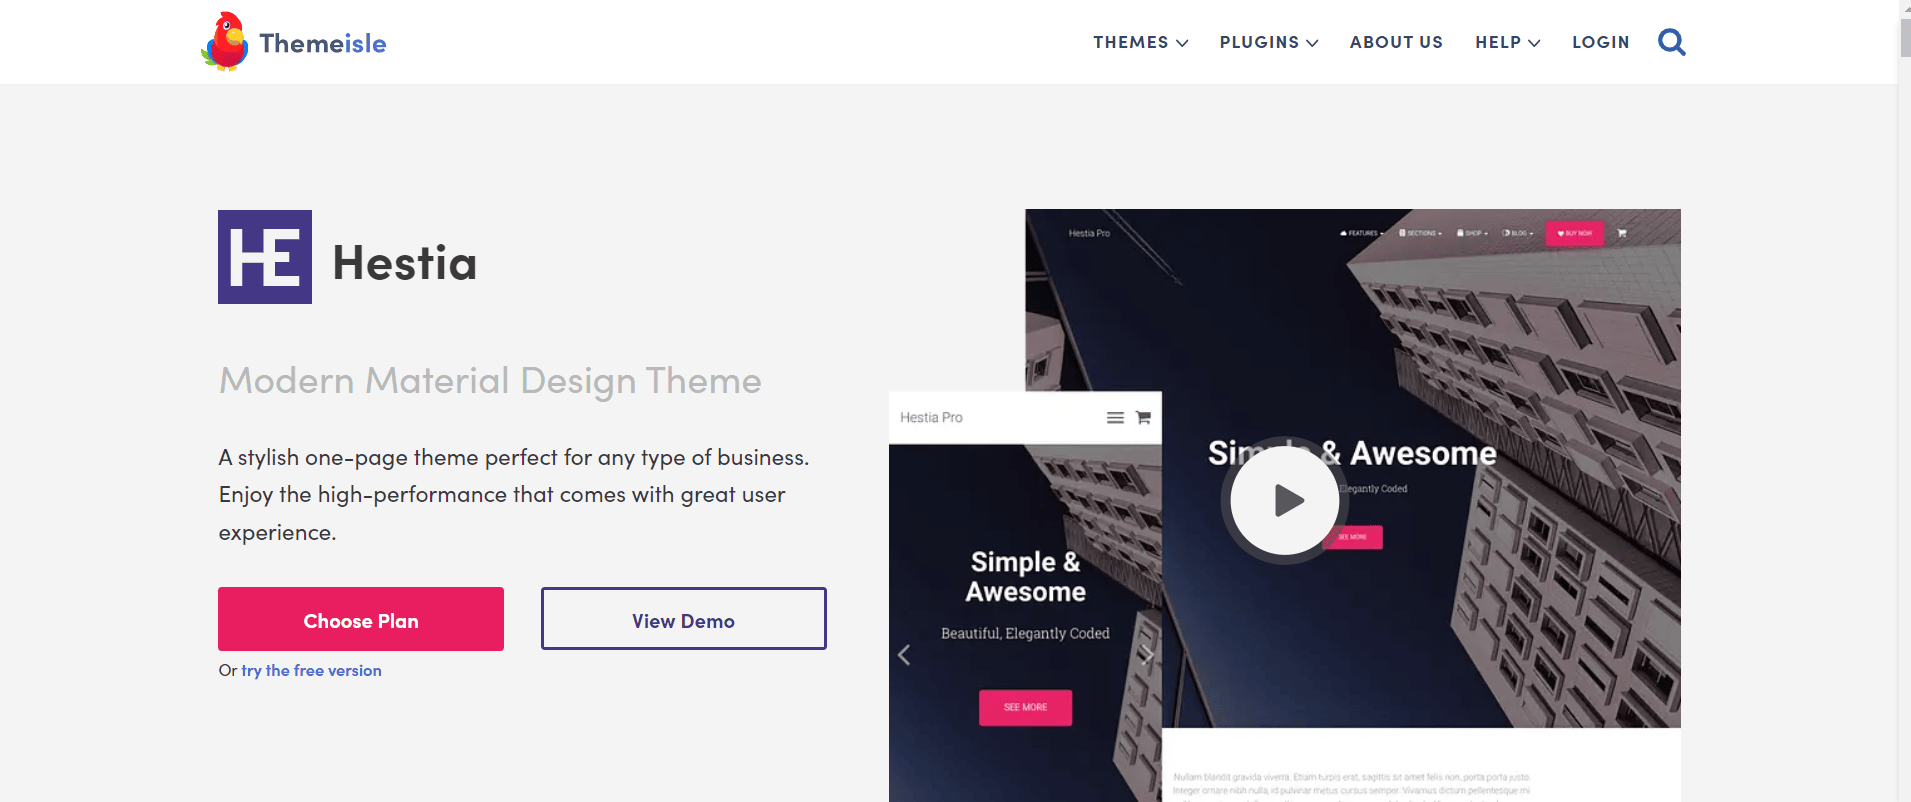 Hestia theme's homepage with a modern material design layout, presenting as a one-page theme perfect for any business, along with a demo button.